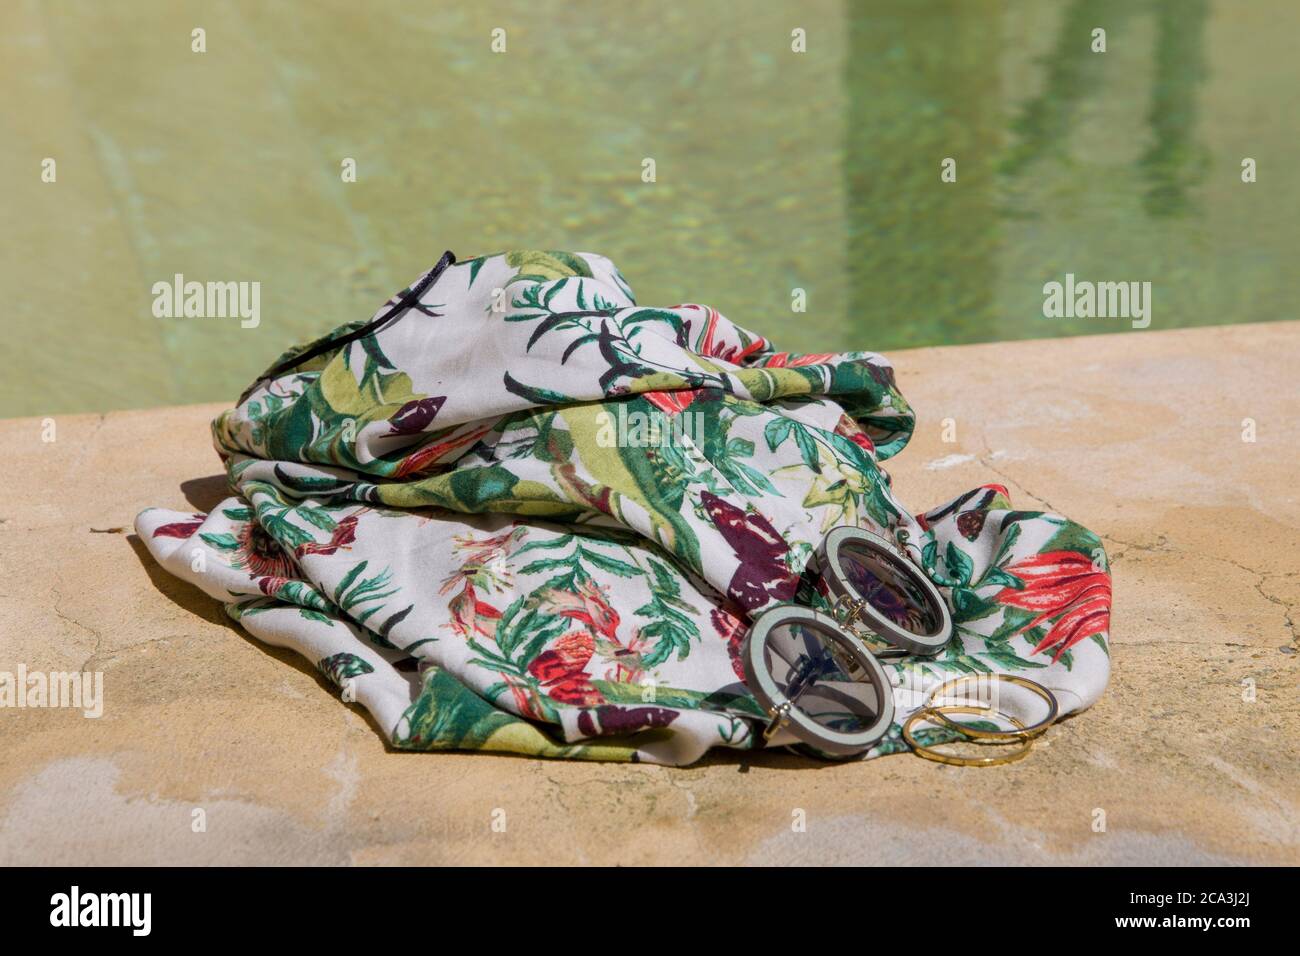 Sunglasses and tropical dress on the edge of a swimming pool. Summer concept with copy space. Stock Photo